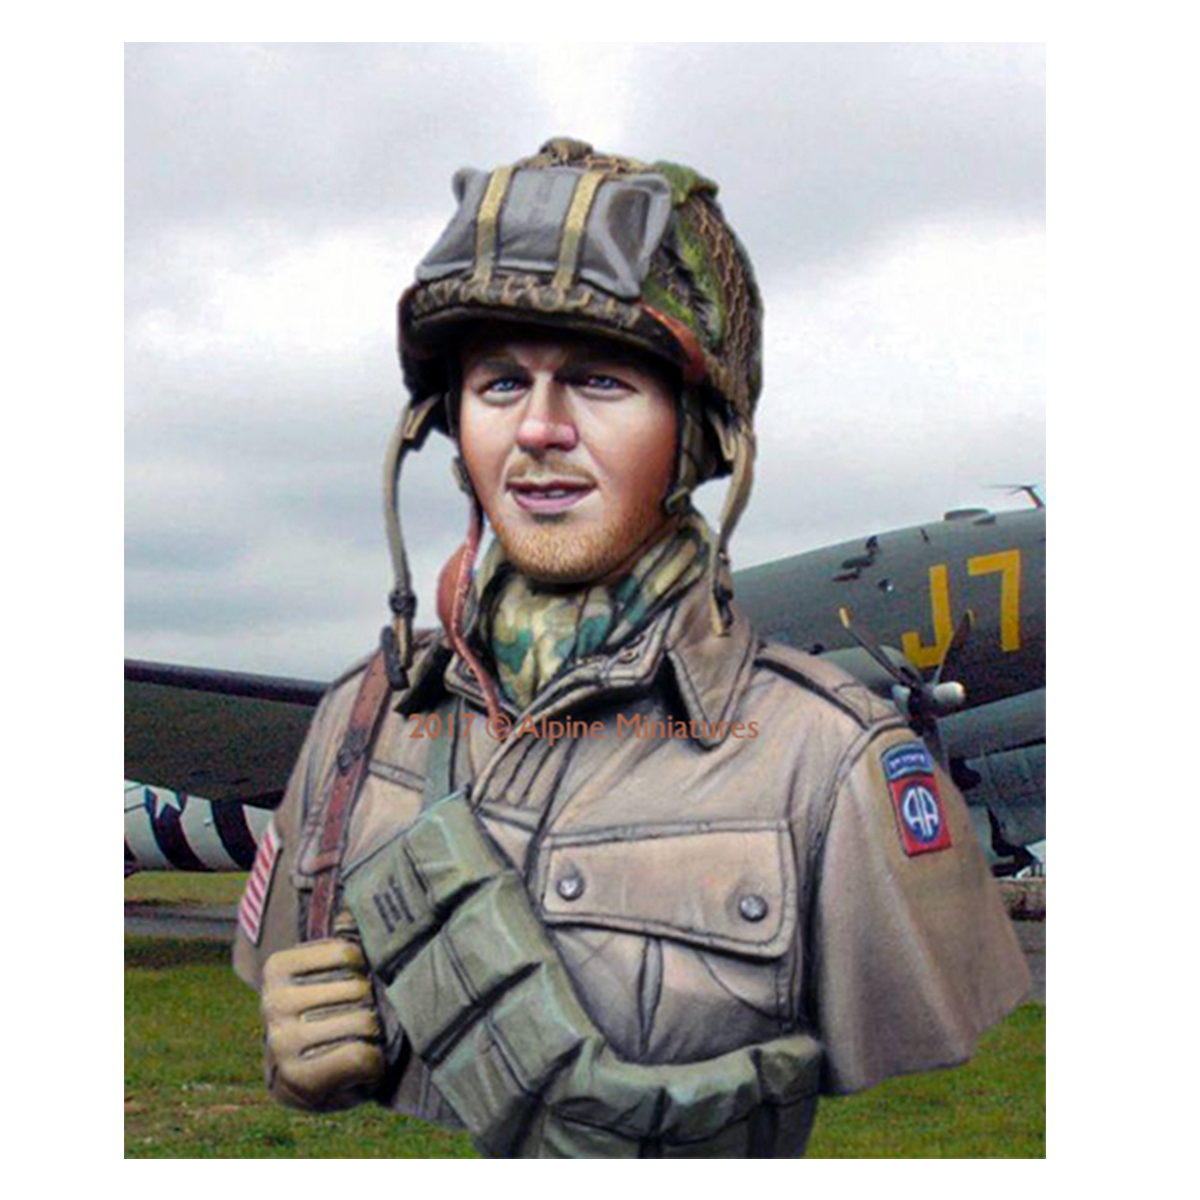 Alpine Miniatures – 82nd Airborne “All American” (1/16) Bust